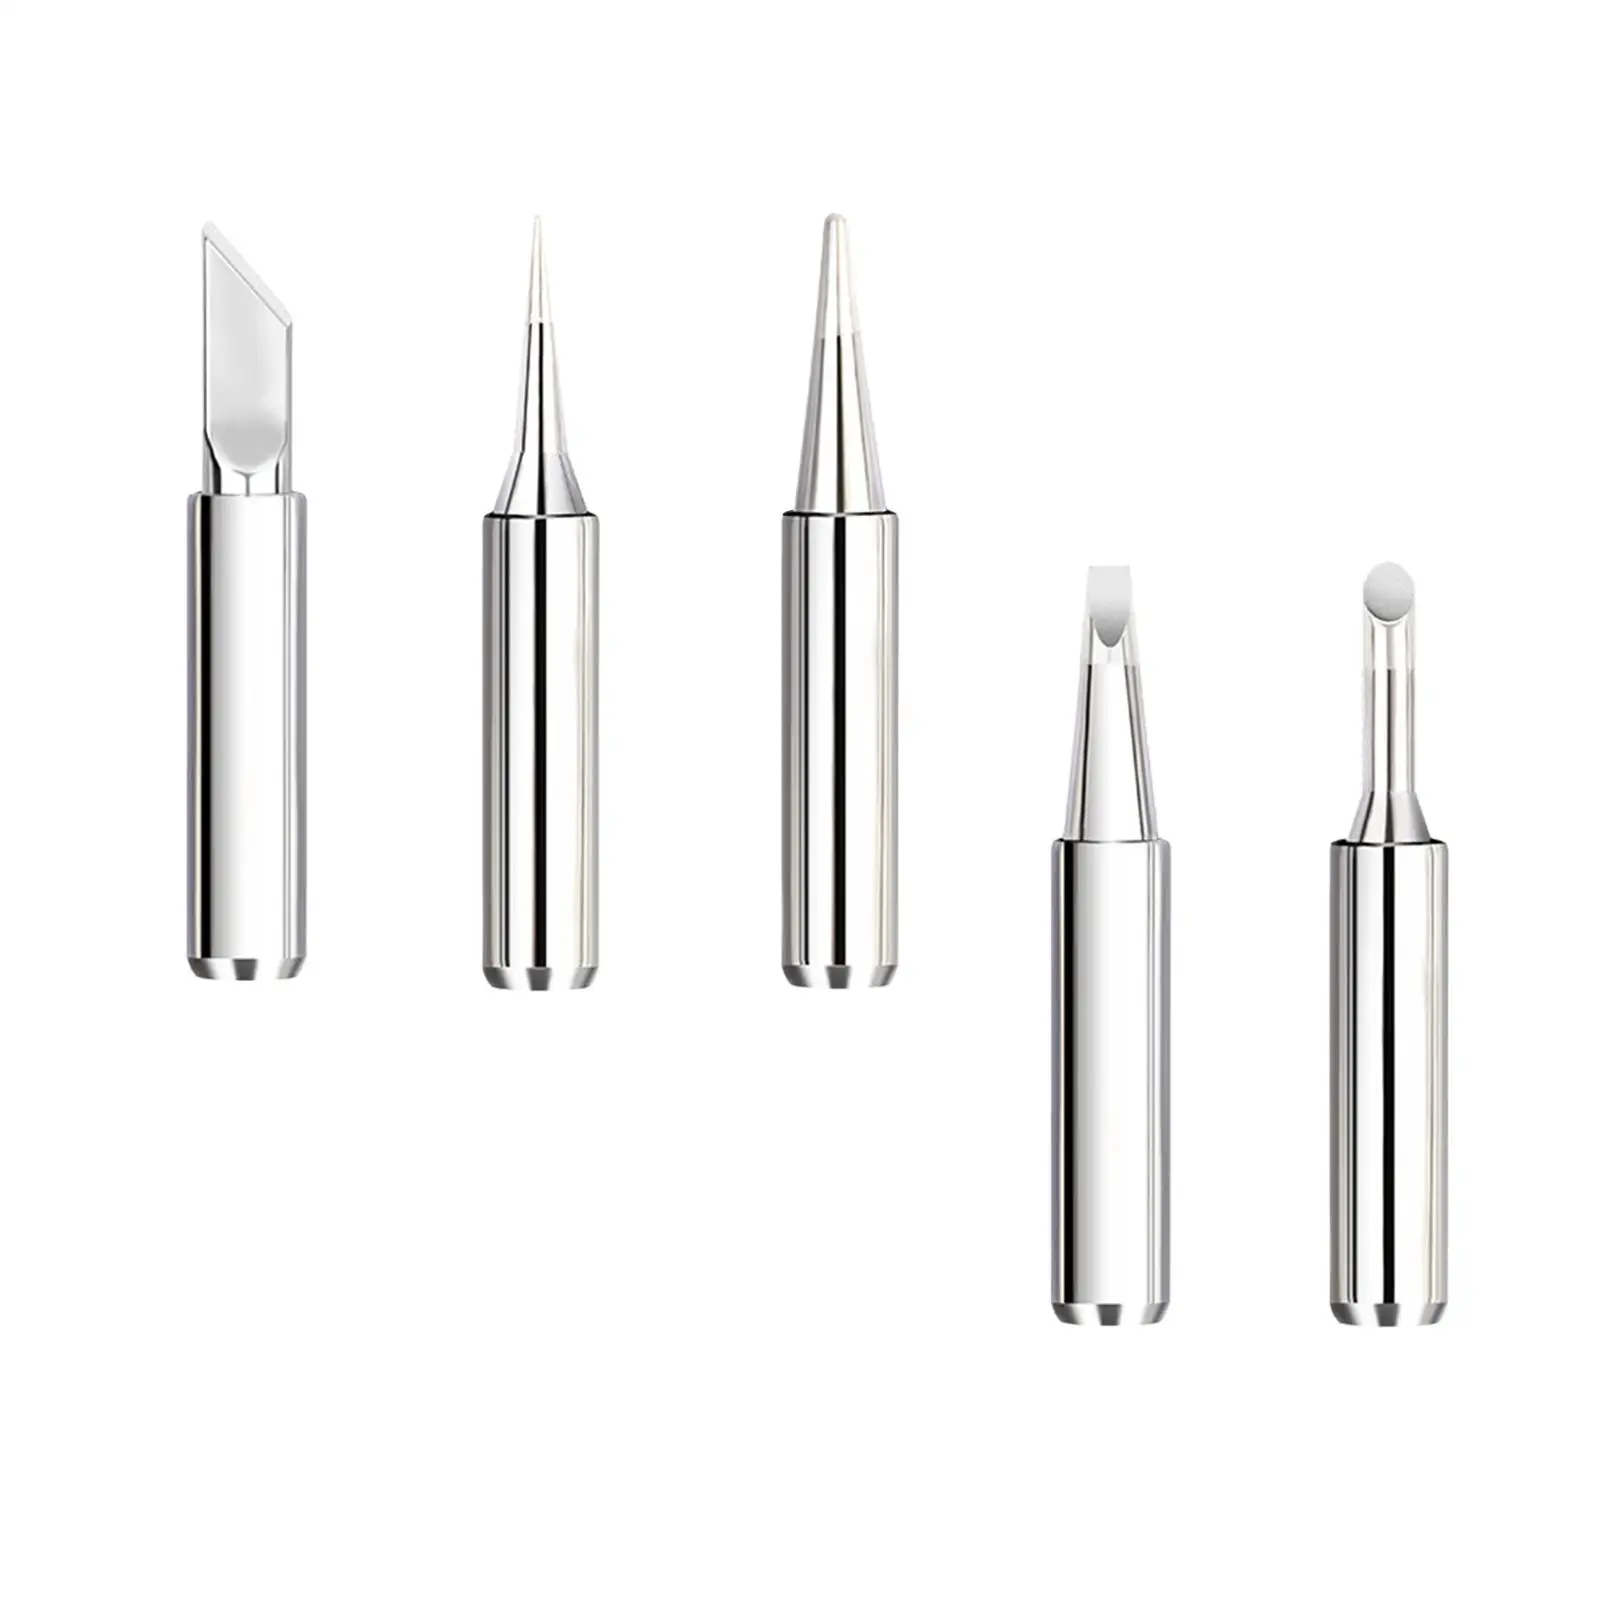 5x Soldering Iron Tips Durable for Welding Tools Soldering Station Parts